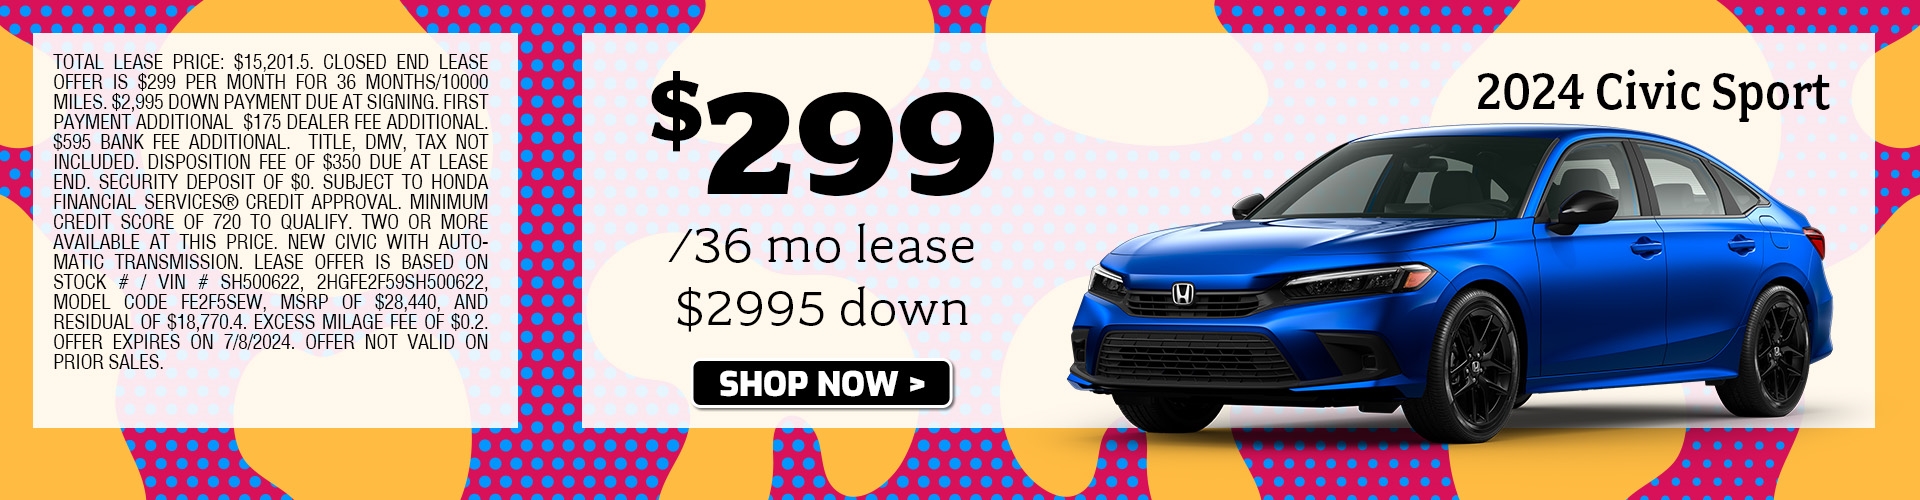 civic lease special